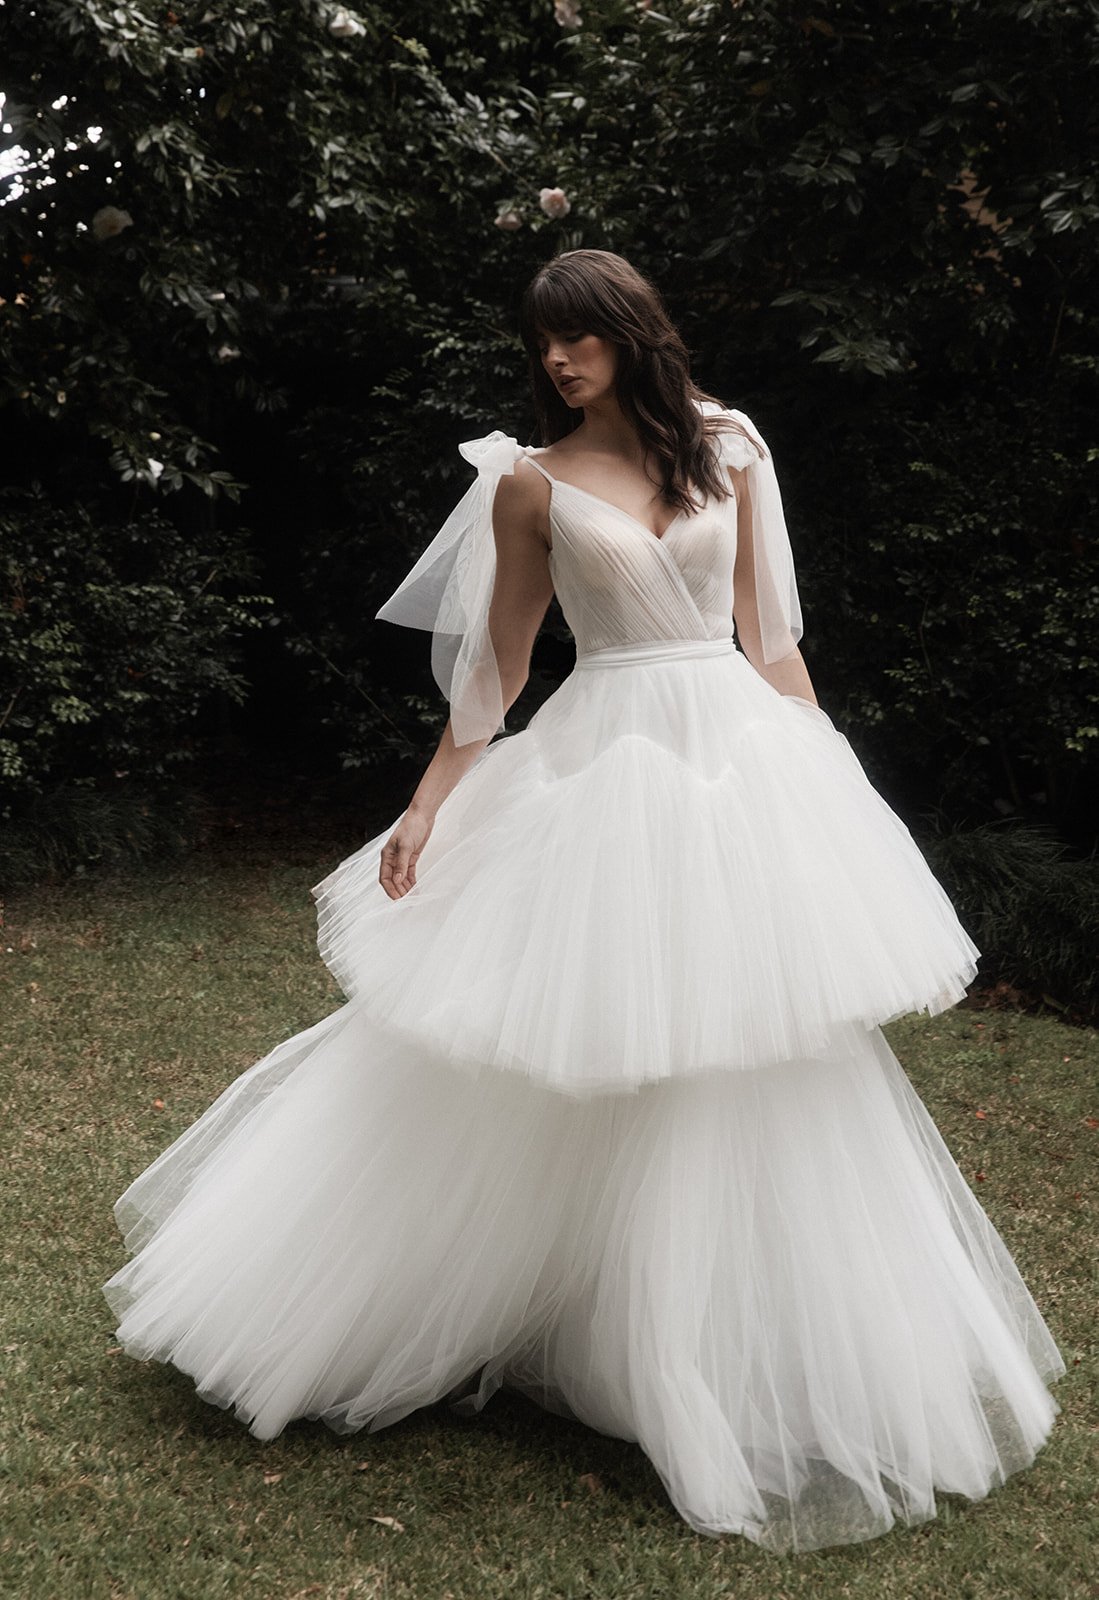 Tulle ballgown The Riviera Moira Hughes Couture Take Flight Collection Sydney Bride.jpg